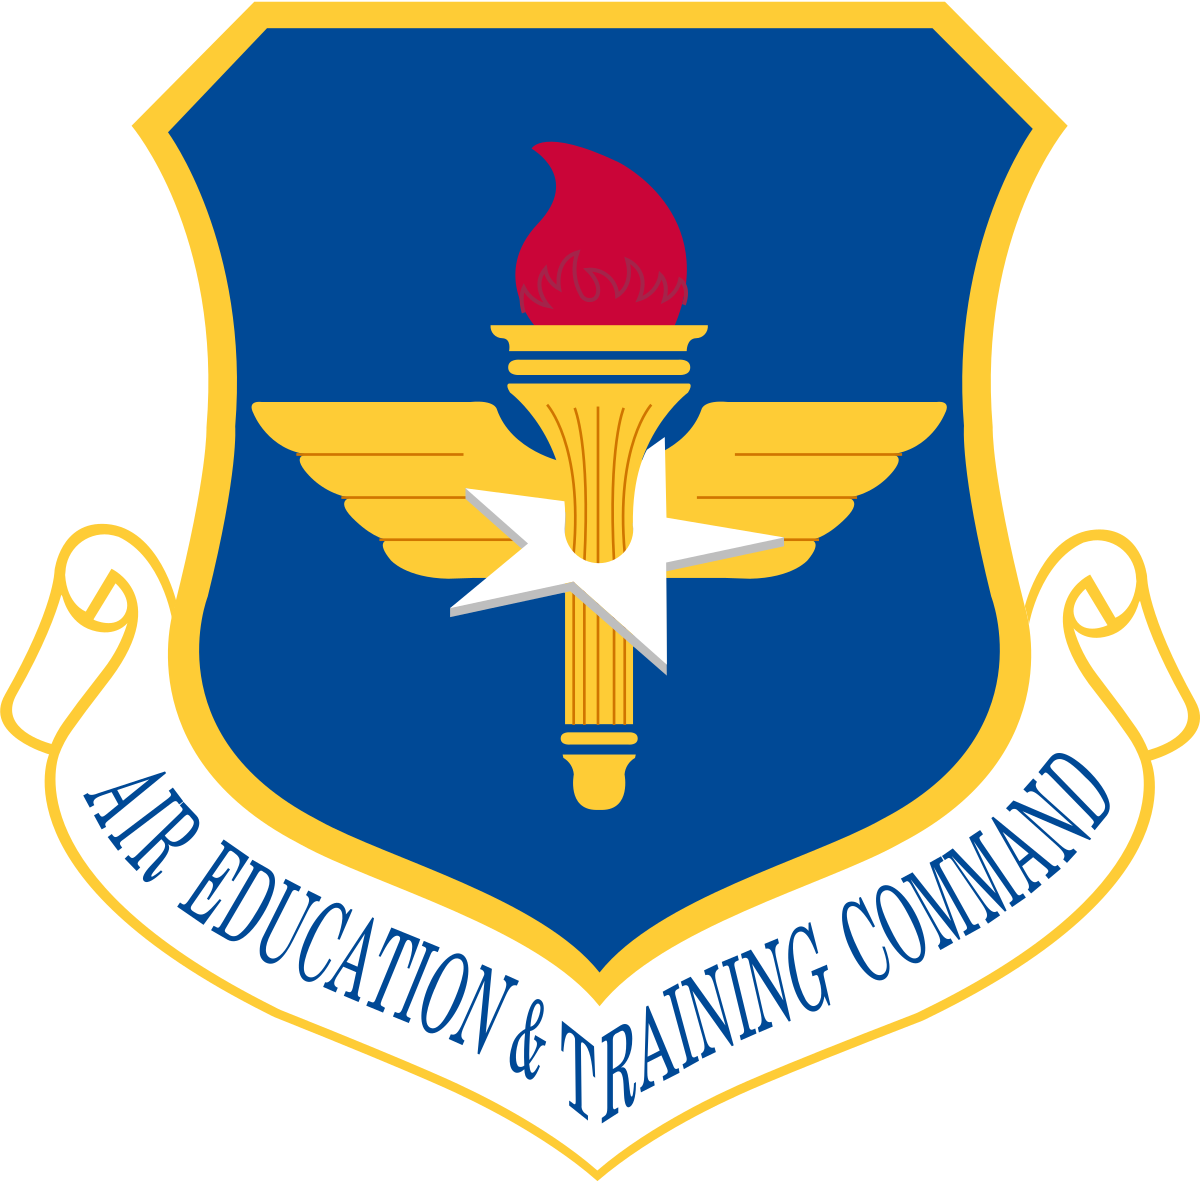 Air education and training command